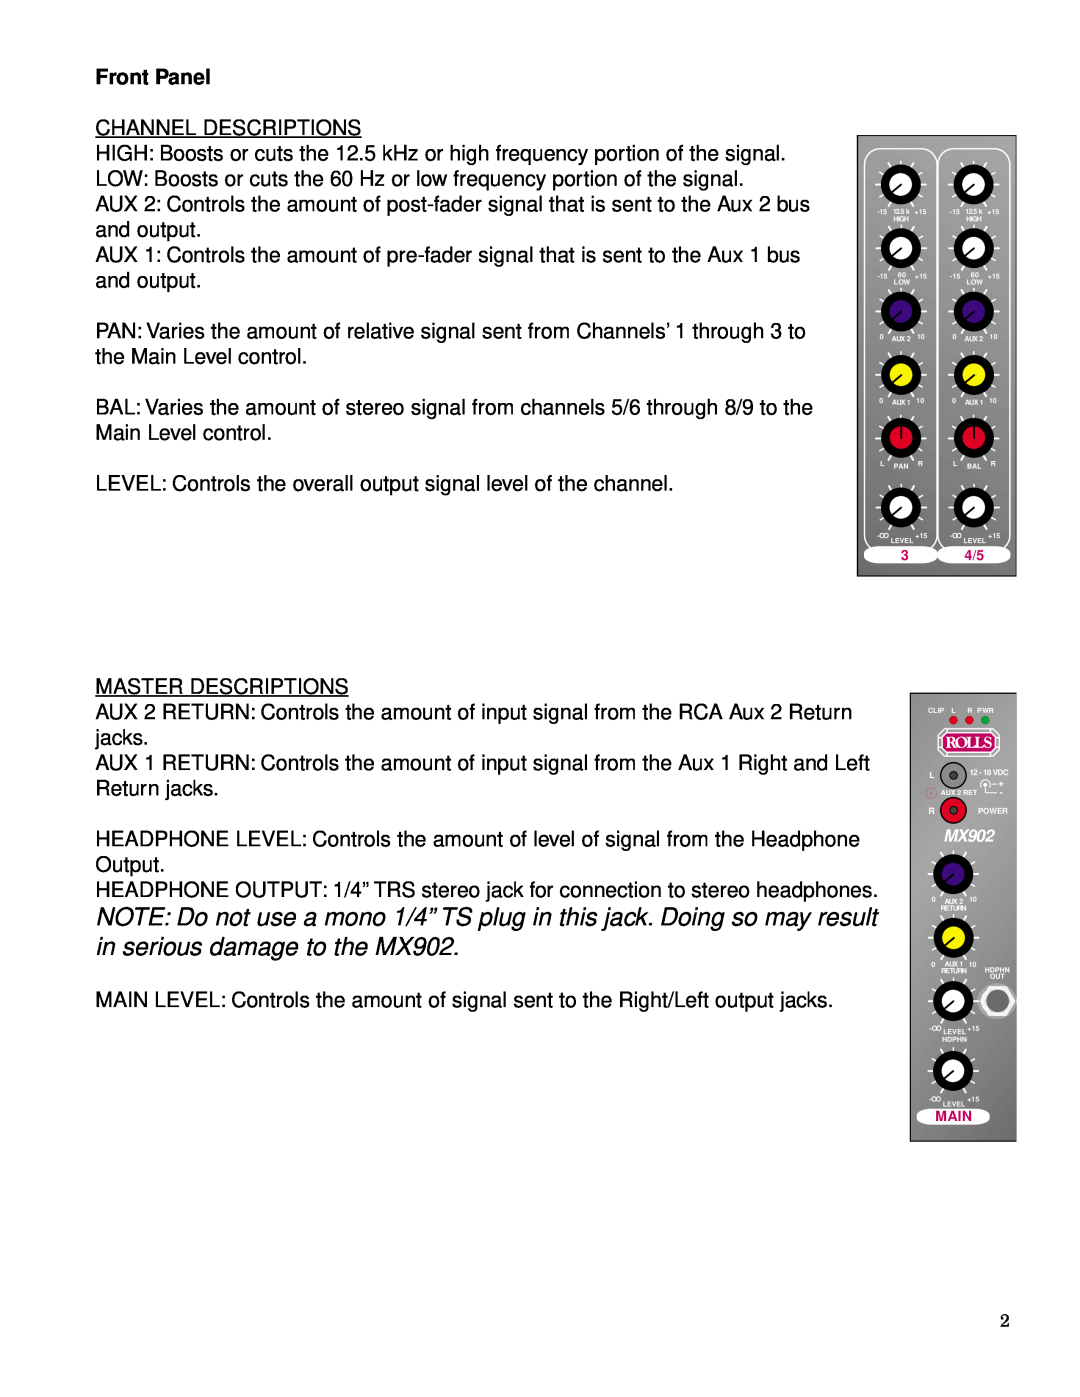 Rolls MX902 owner manual NOTE Do not use a mono 1/4” TS plug in this jack. Doing so may result, Front Panel 